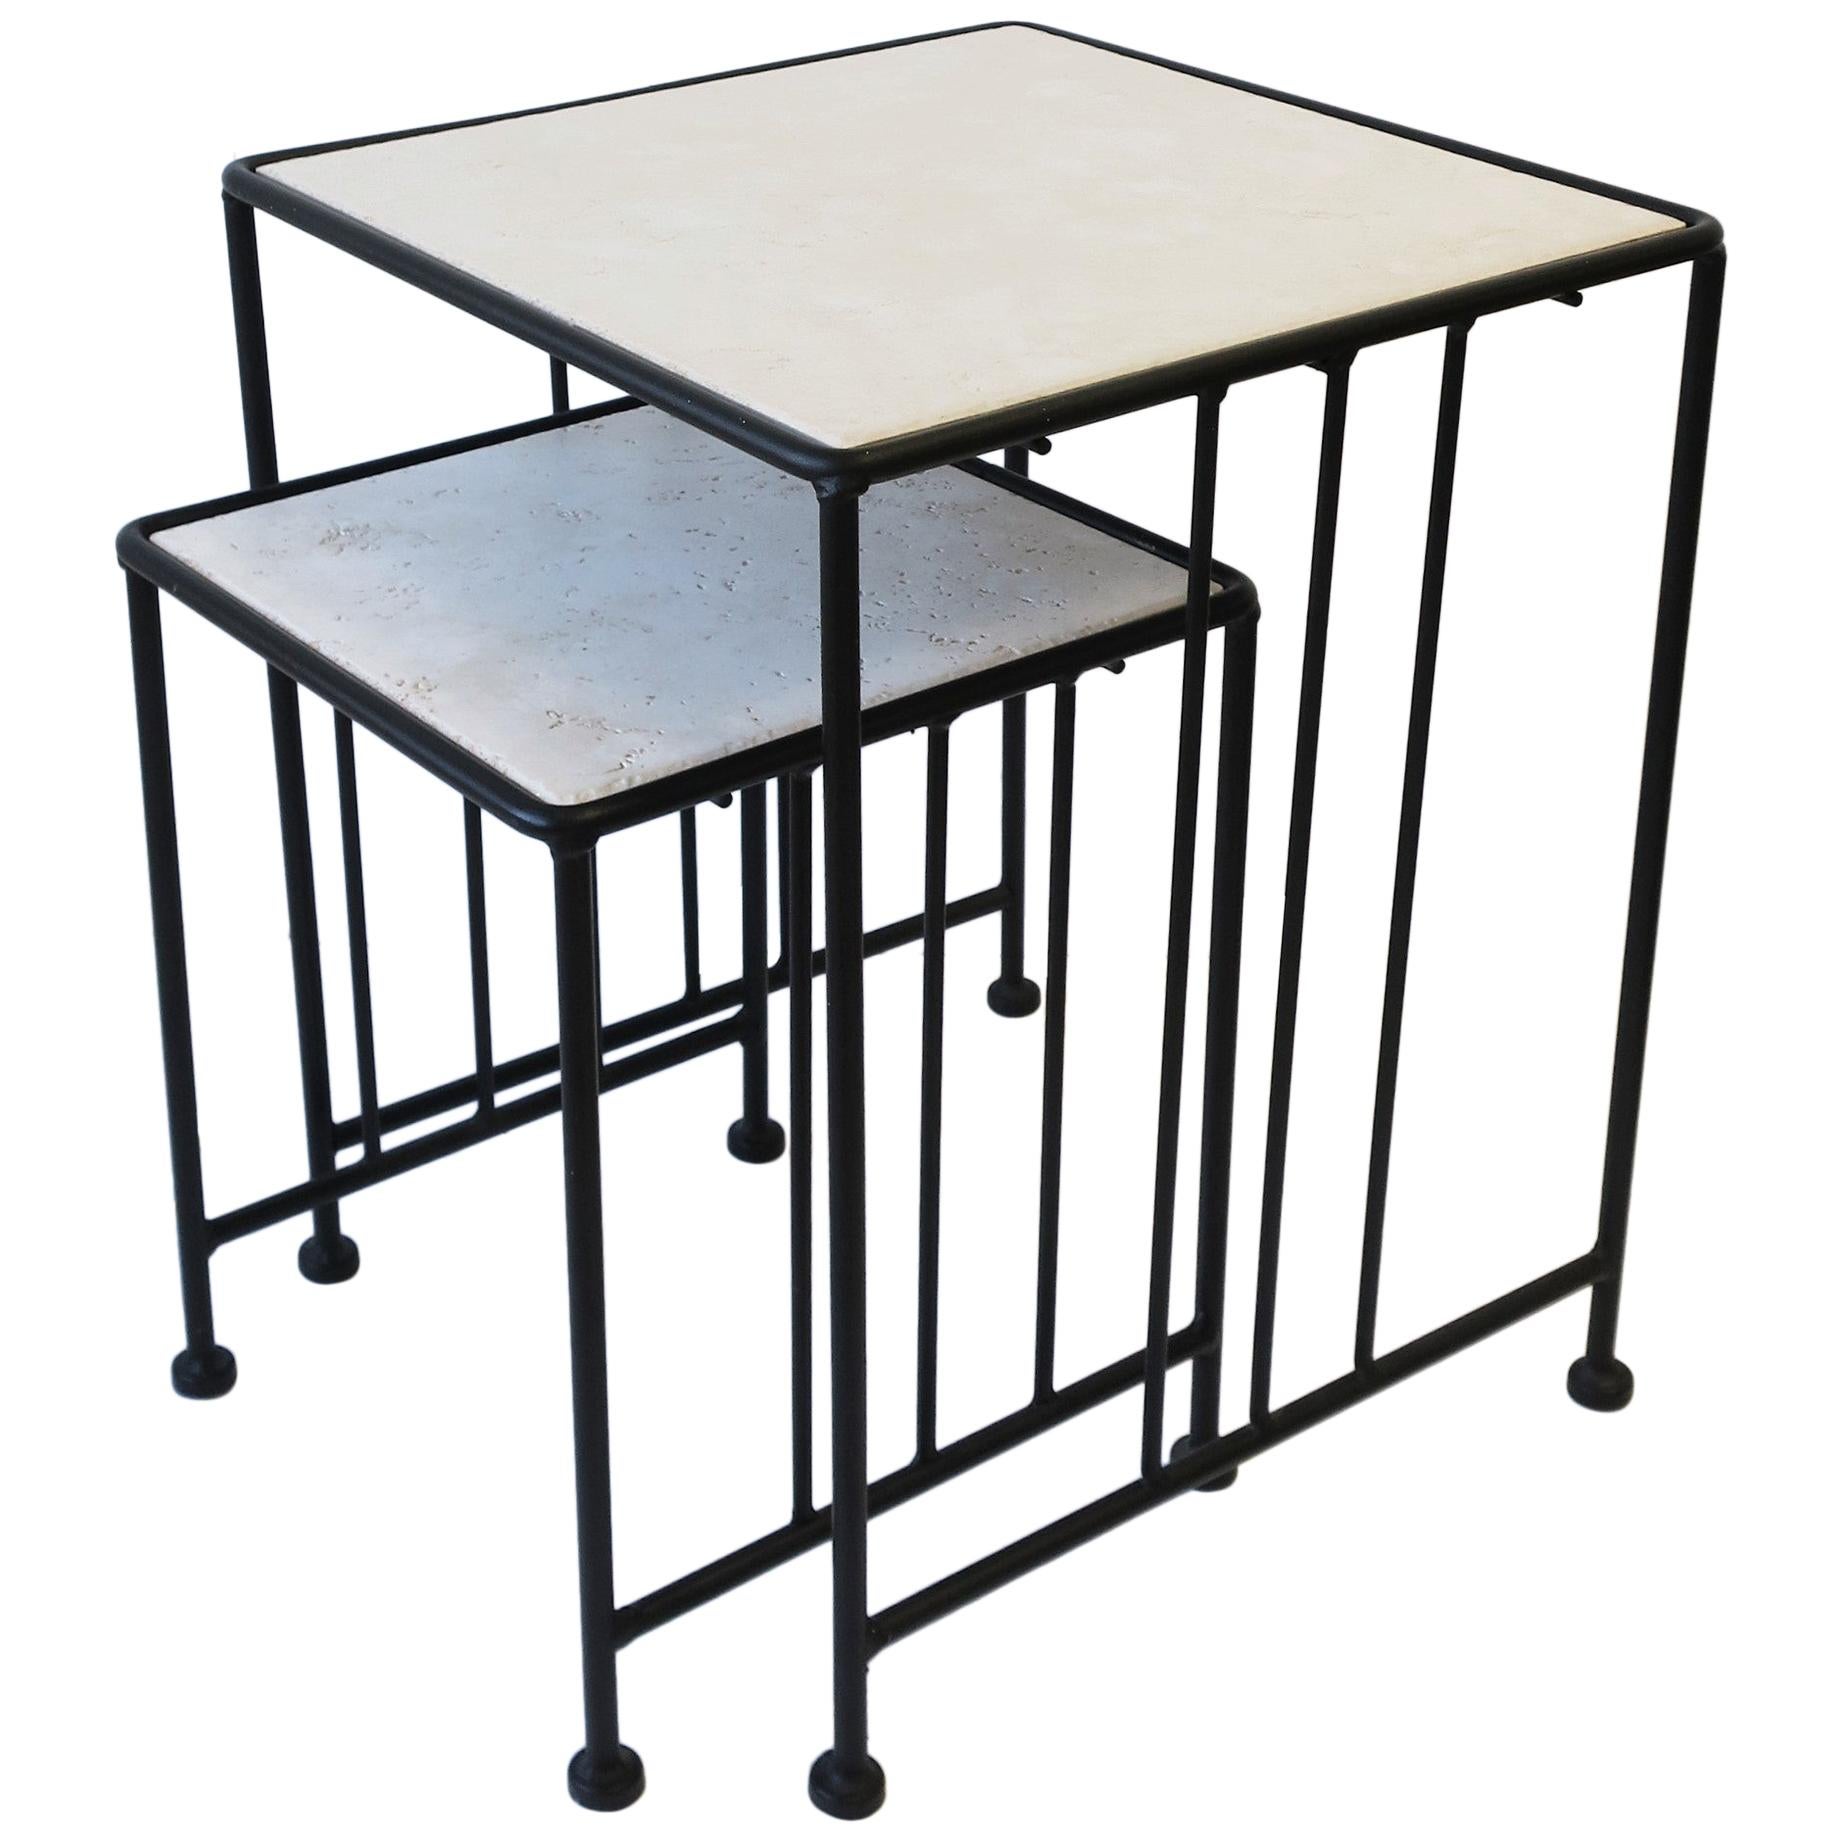 Italian Black End or Nesting Tables in the Art Deco Bauhaus Style